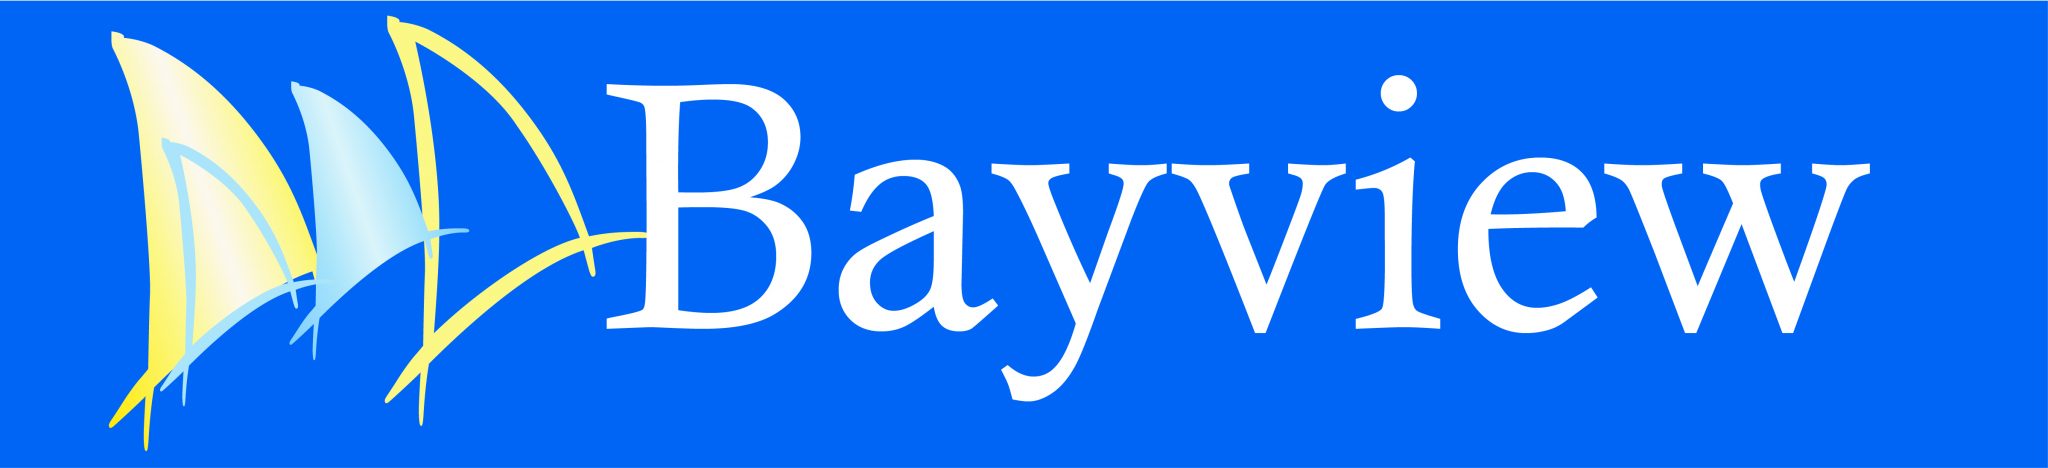 Bayview Real Estate - Real Estate Agency